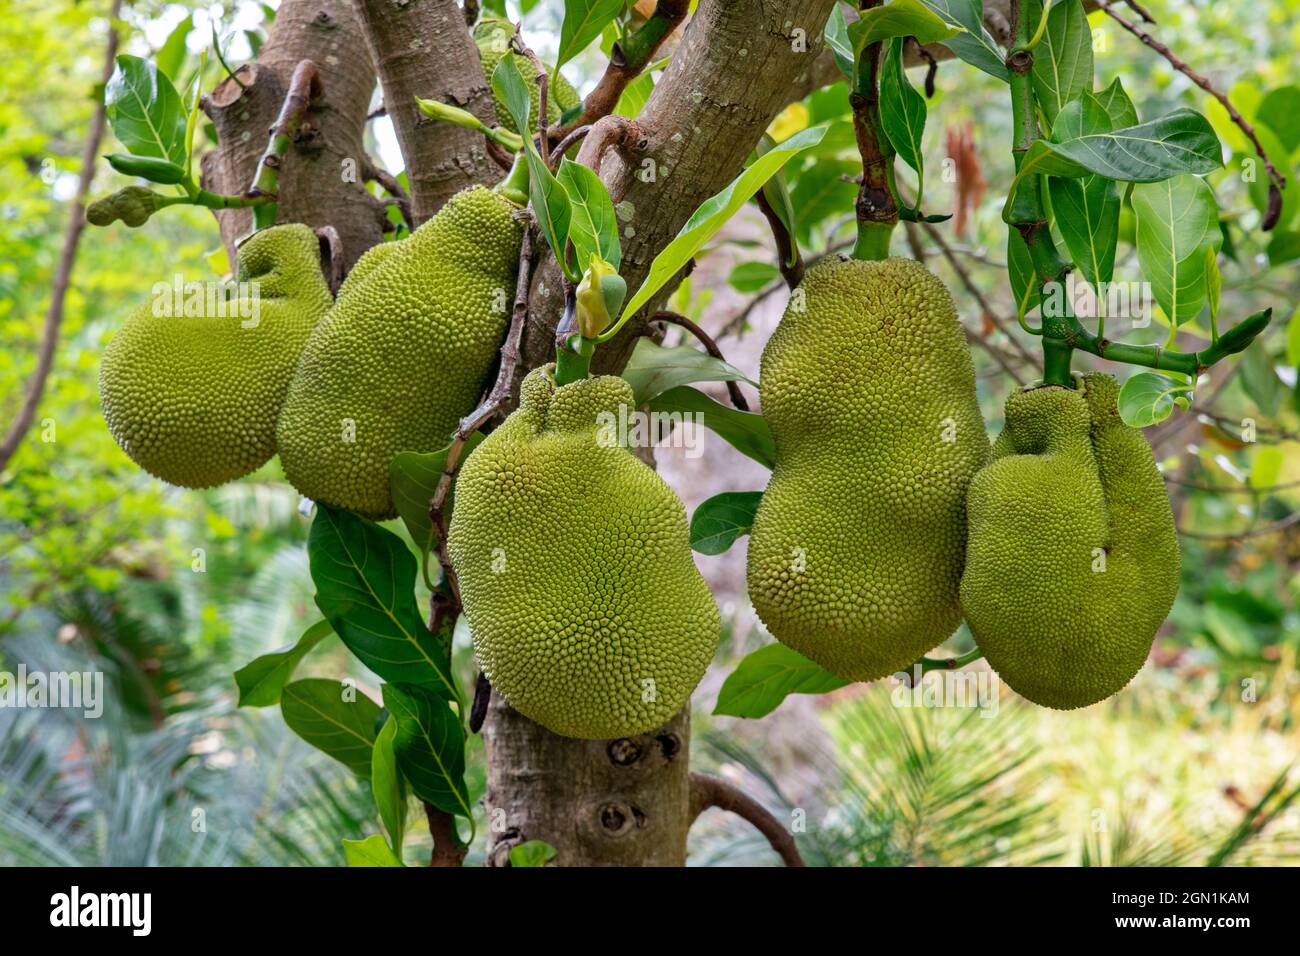 Jackfruit tree full of ripe bumpy large fruit, tropical tree growing mostly in Asia, Africa or South America producing a fruit with stringy flesh Stock Photo